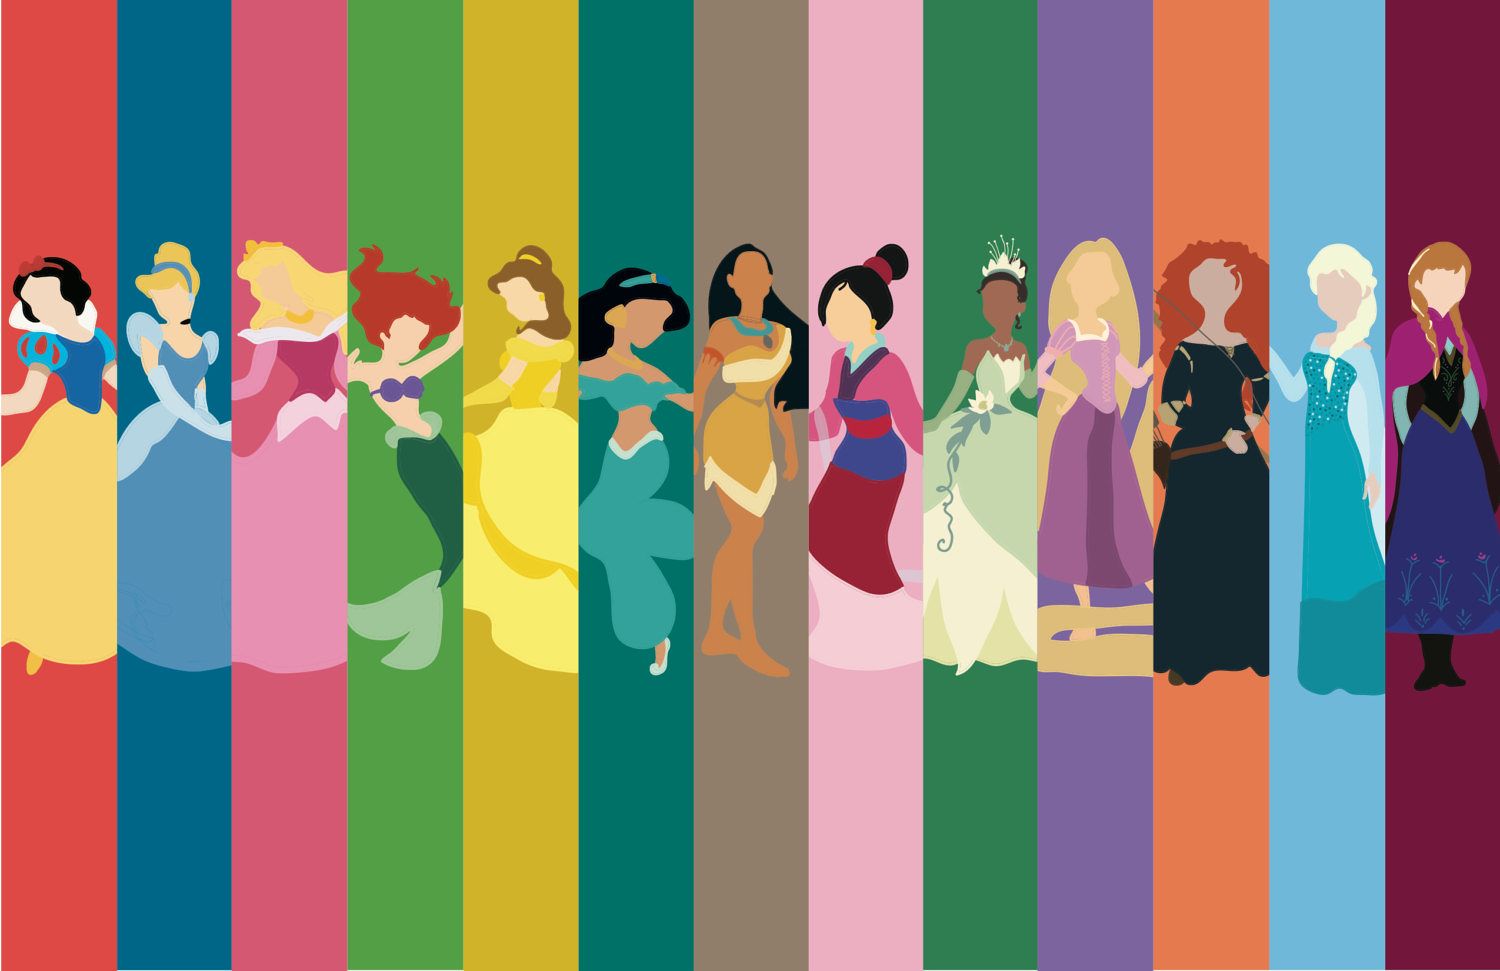 Not Even Masters of General Knowledge Can Get a Perfect Score on This Quiz. Can You? Disney princess